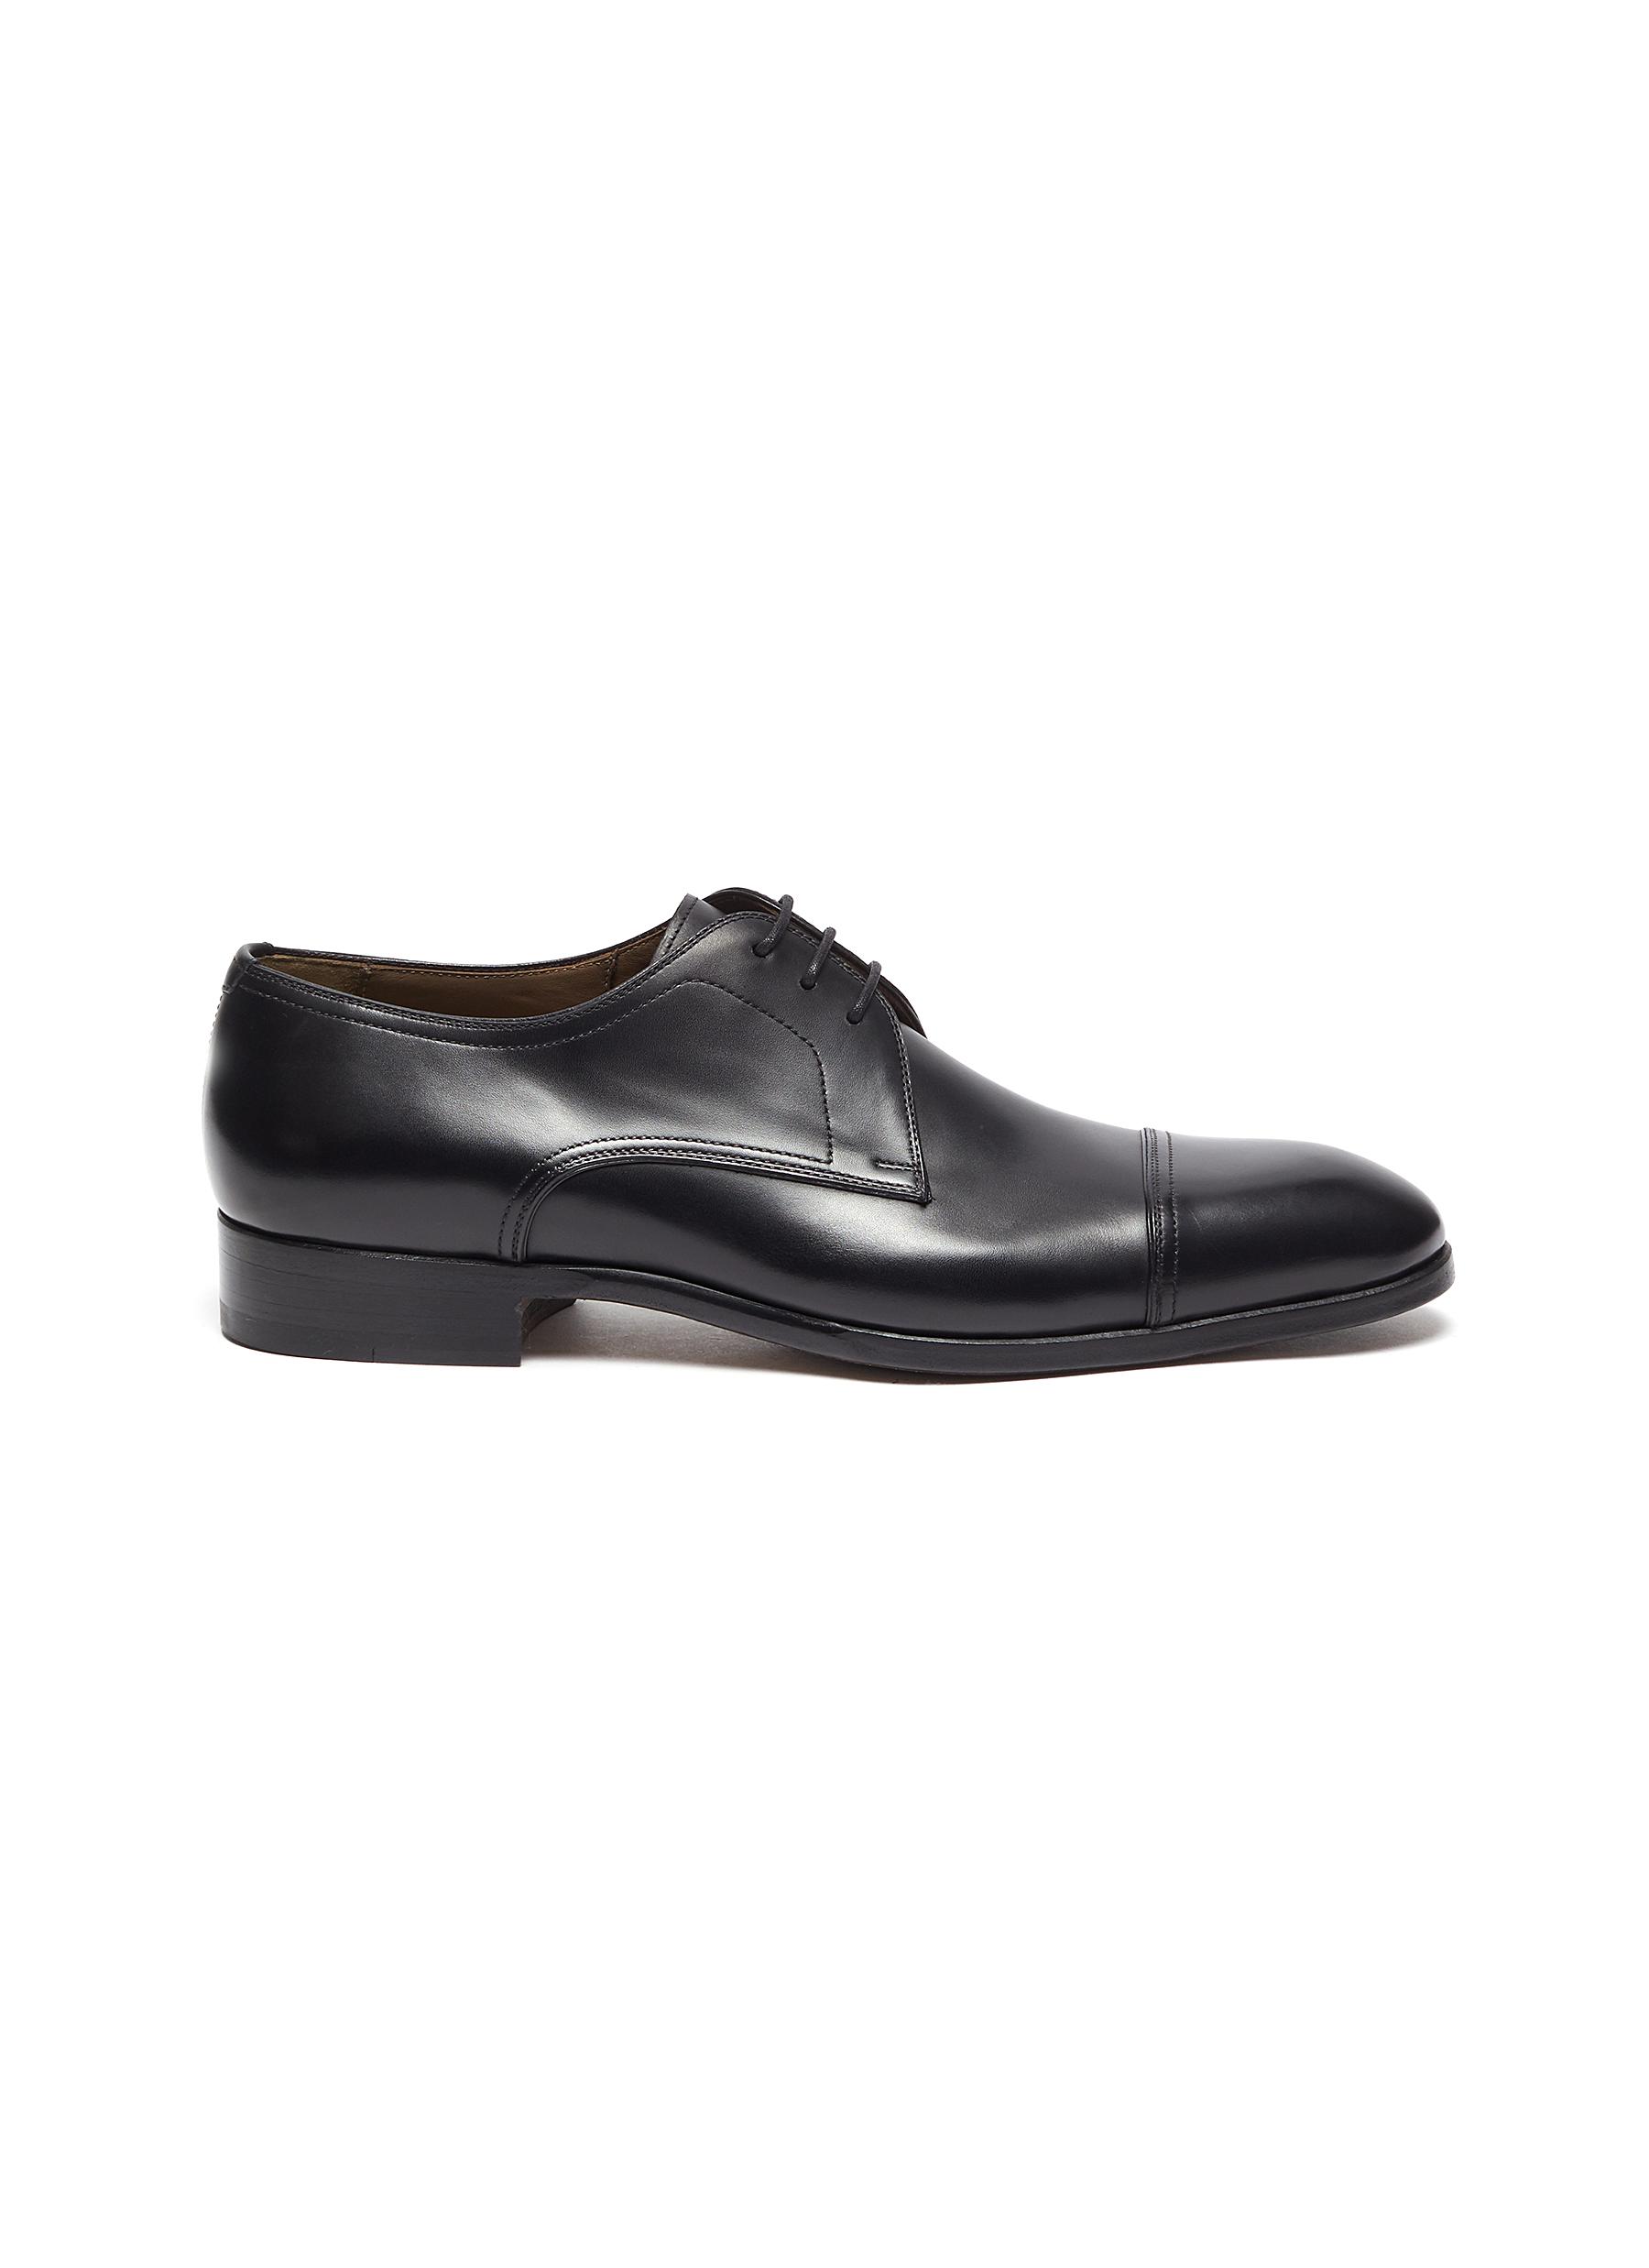 Magnanni ALMOND TOE LEATHER DERBY SHOES